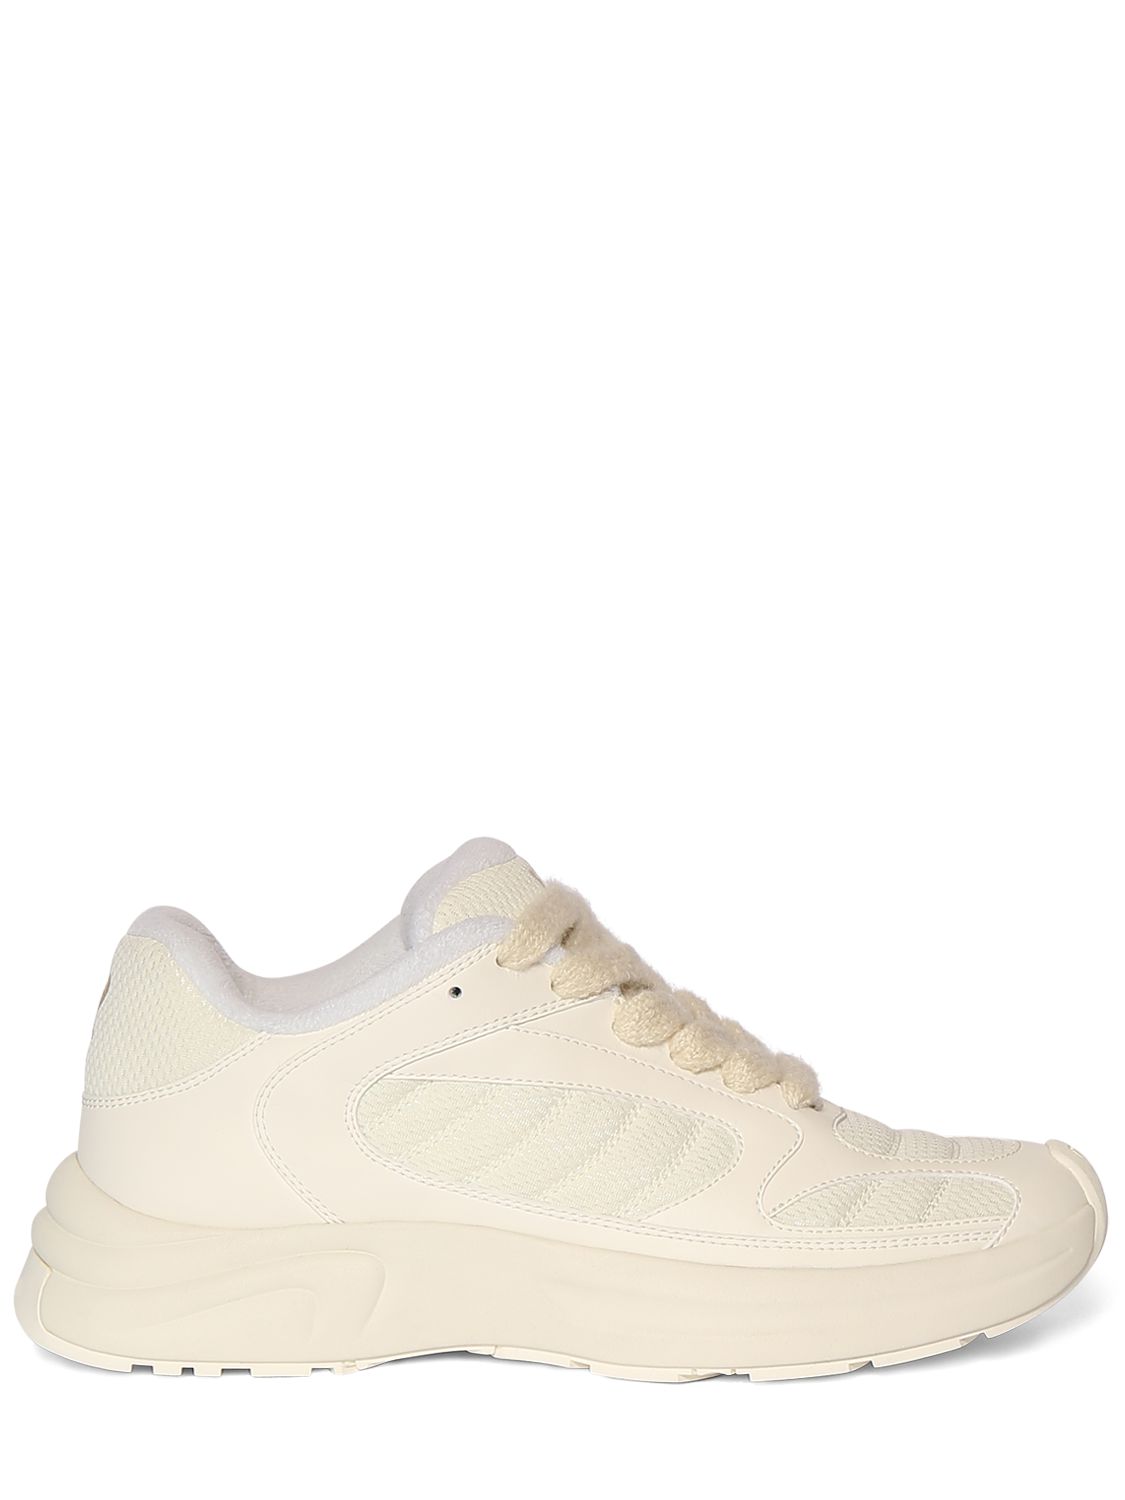 Ami Faux Leather Sneakers